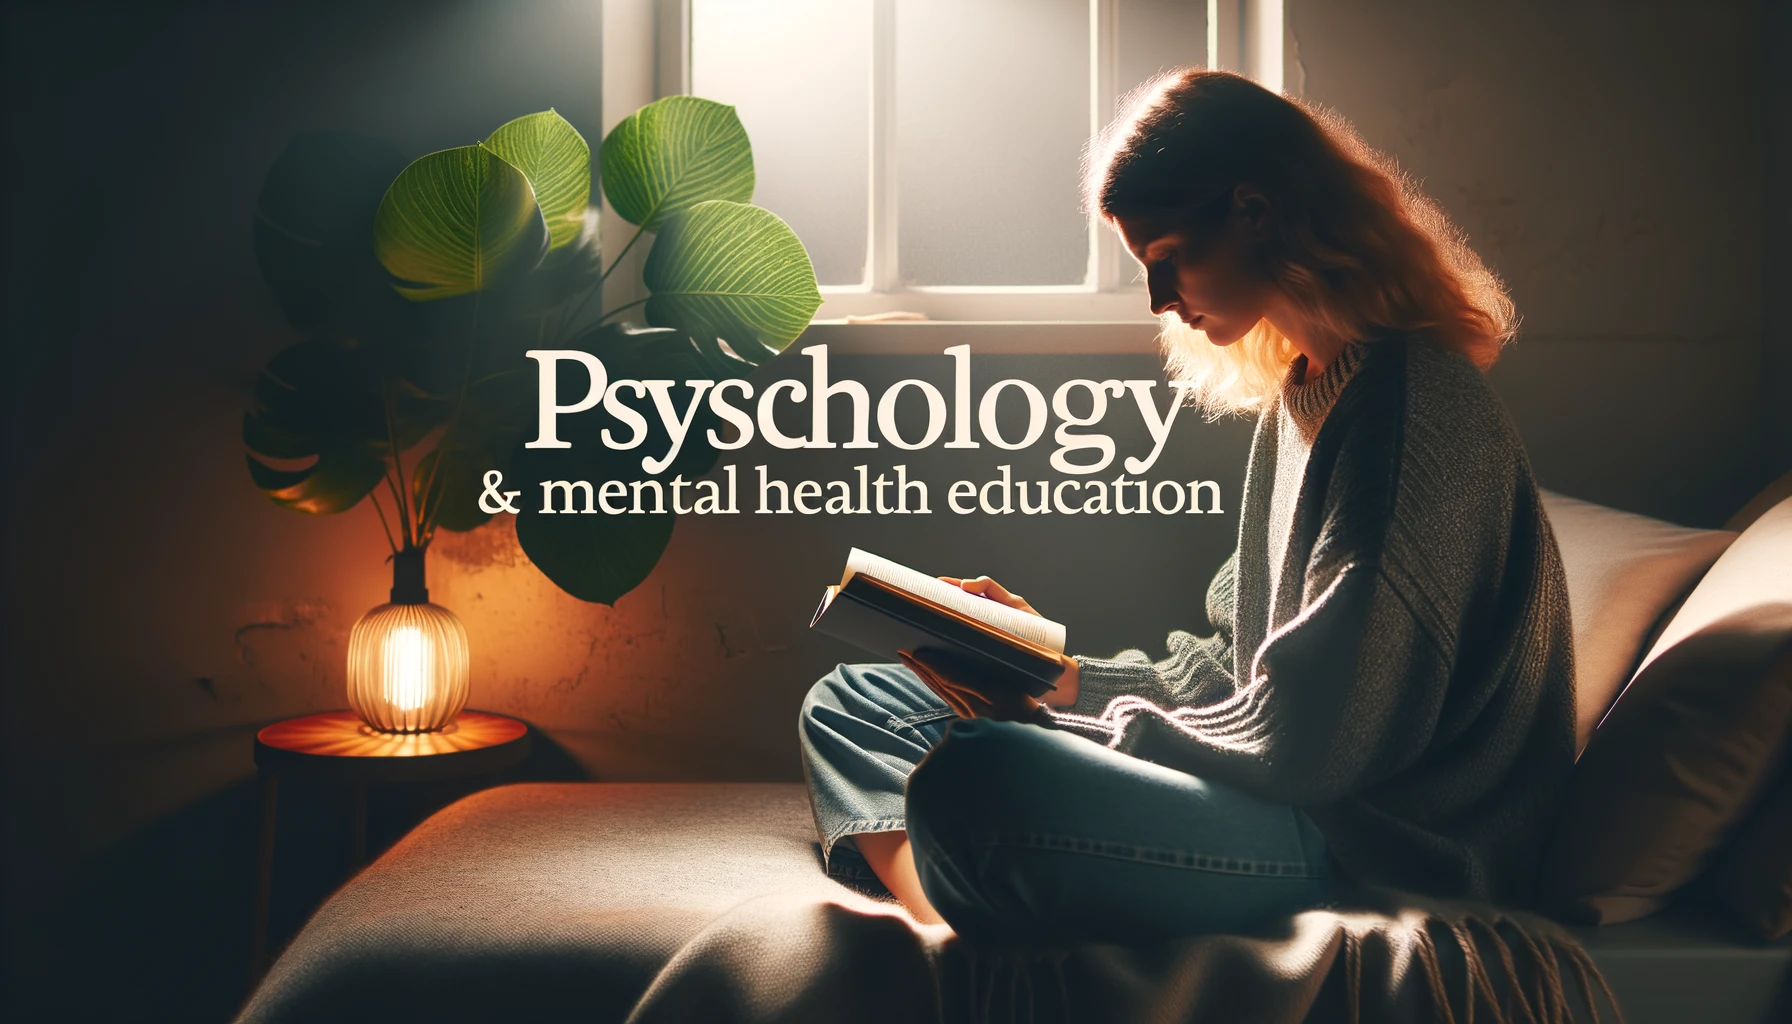 Psychology and mental health niches